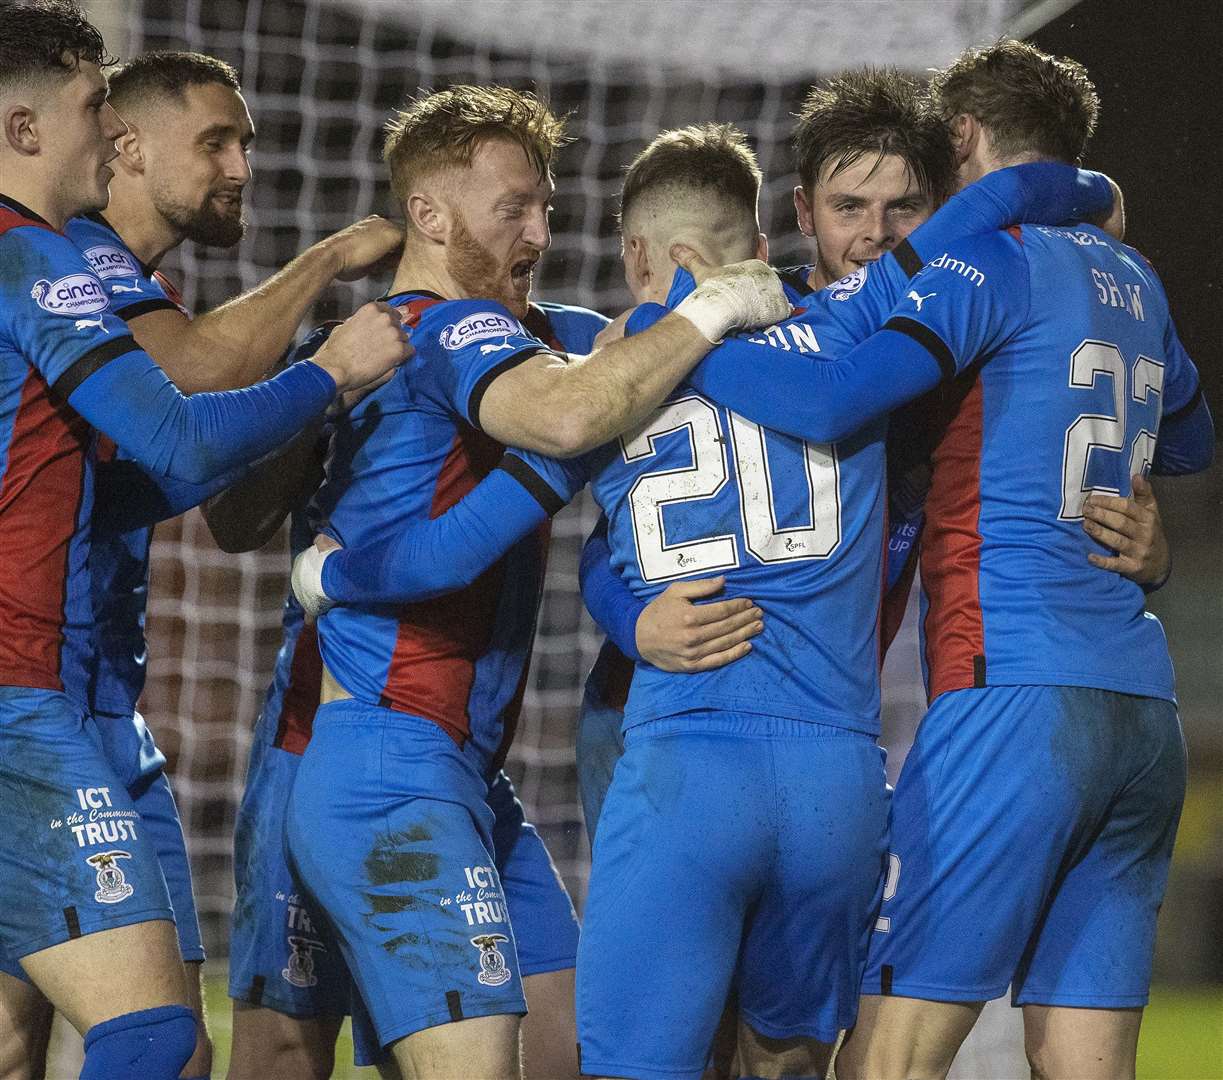 Inverness Caledonian Thistle will play in the Scottish Cup final on June 3.